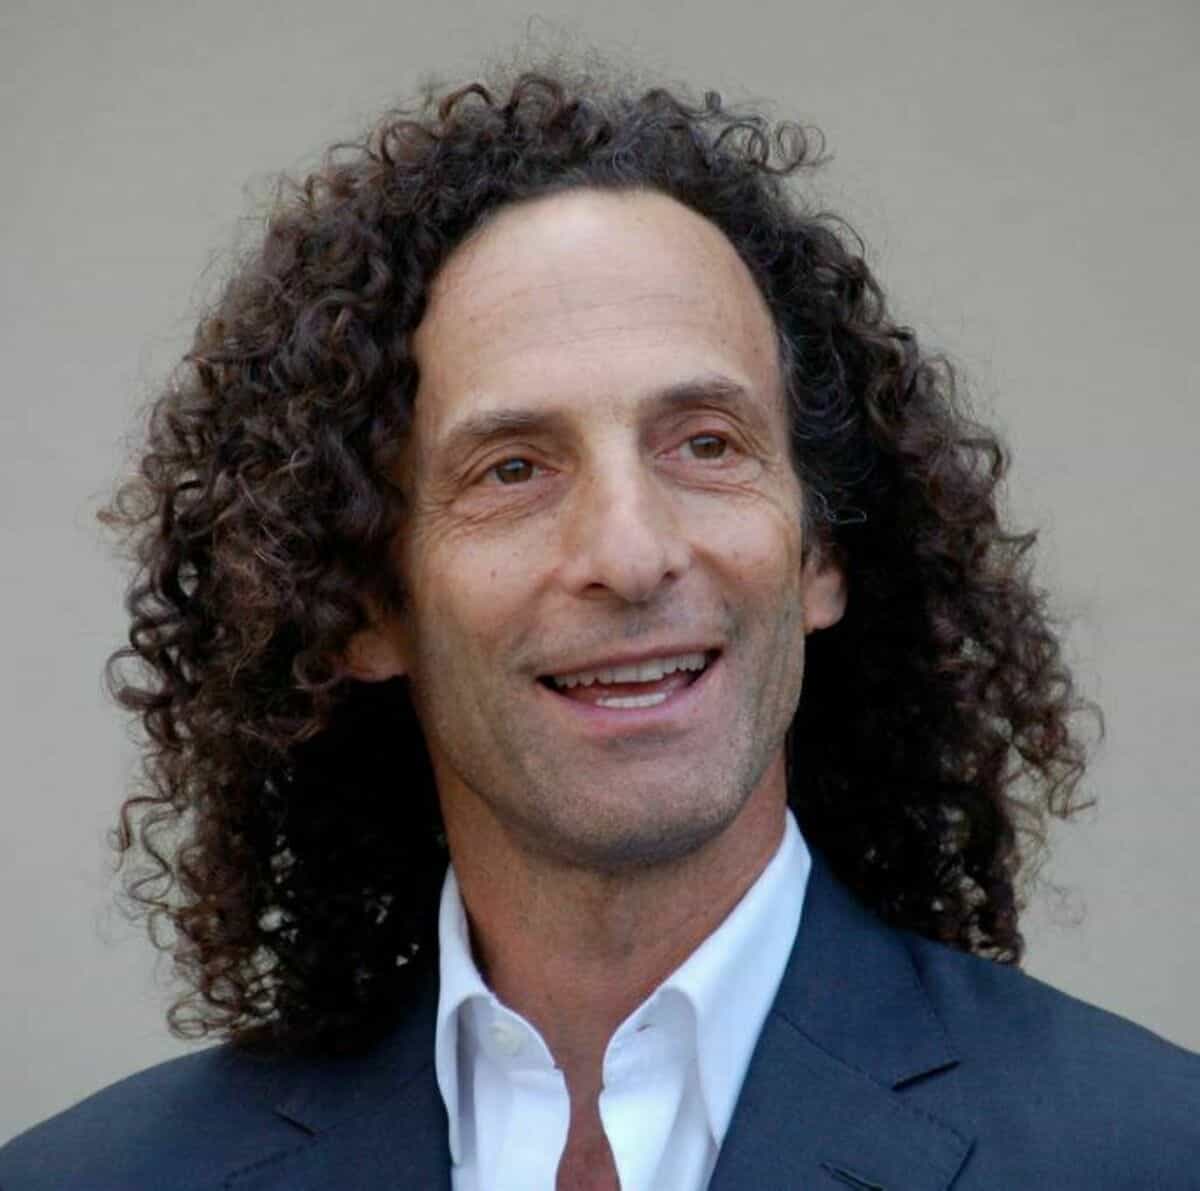 Kenny G - Famous Composer